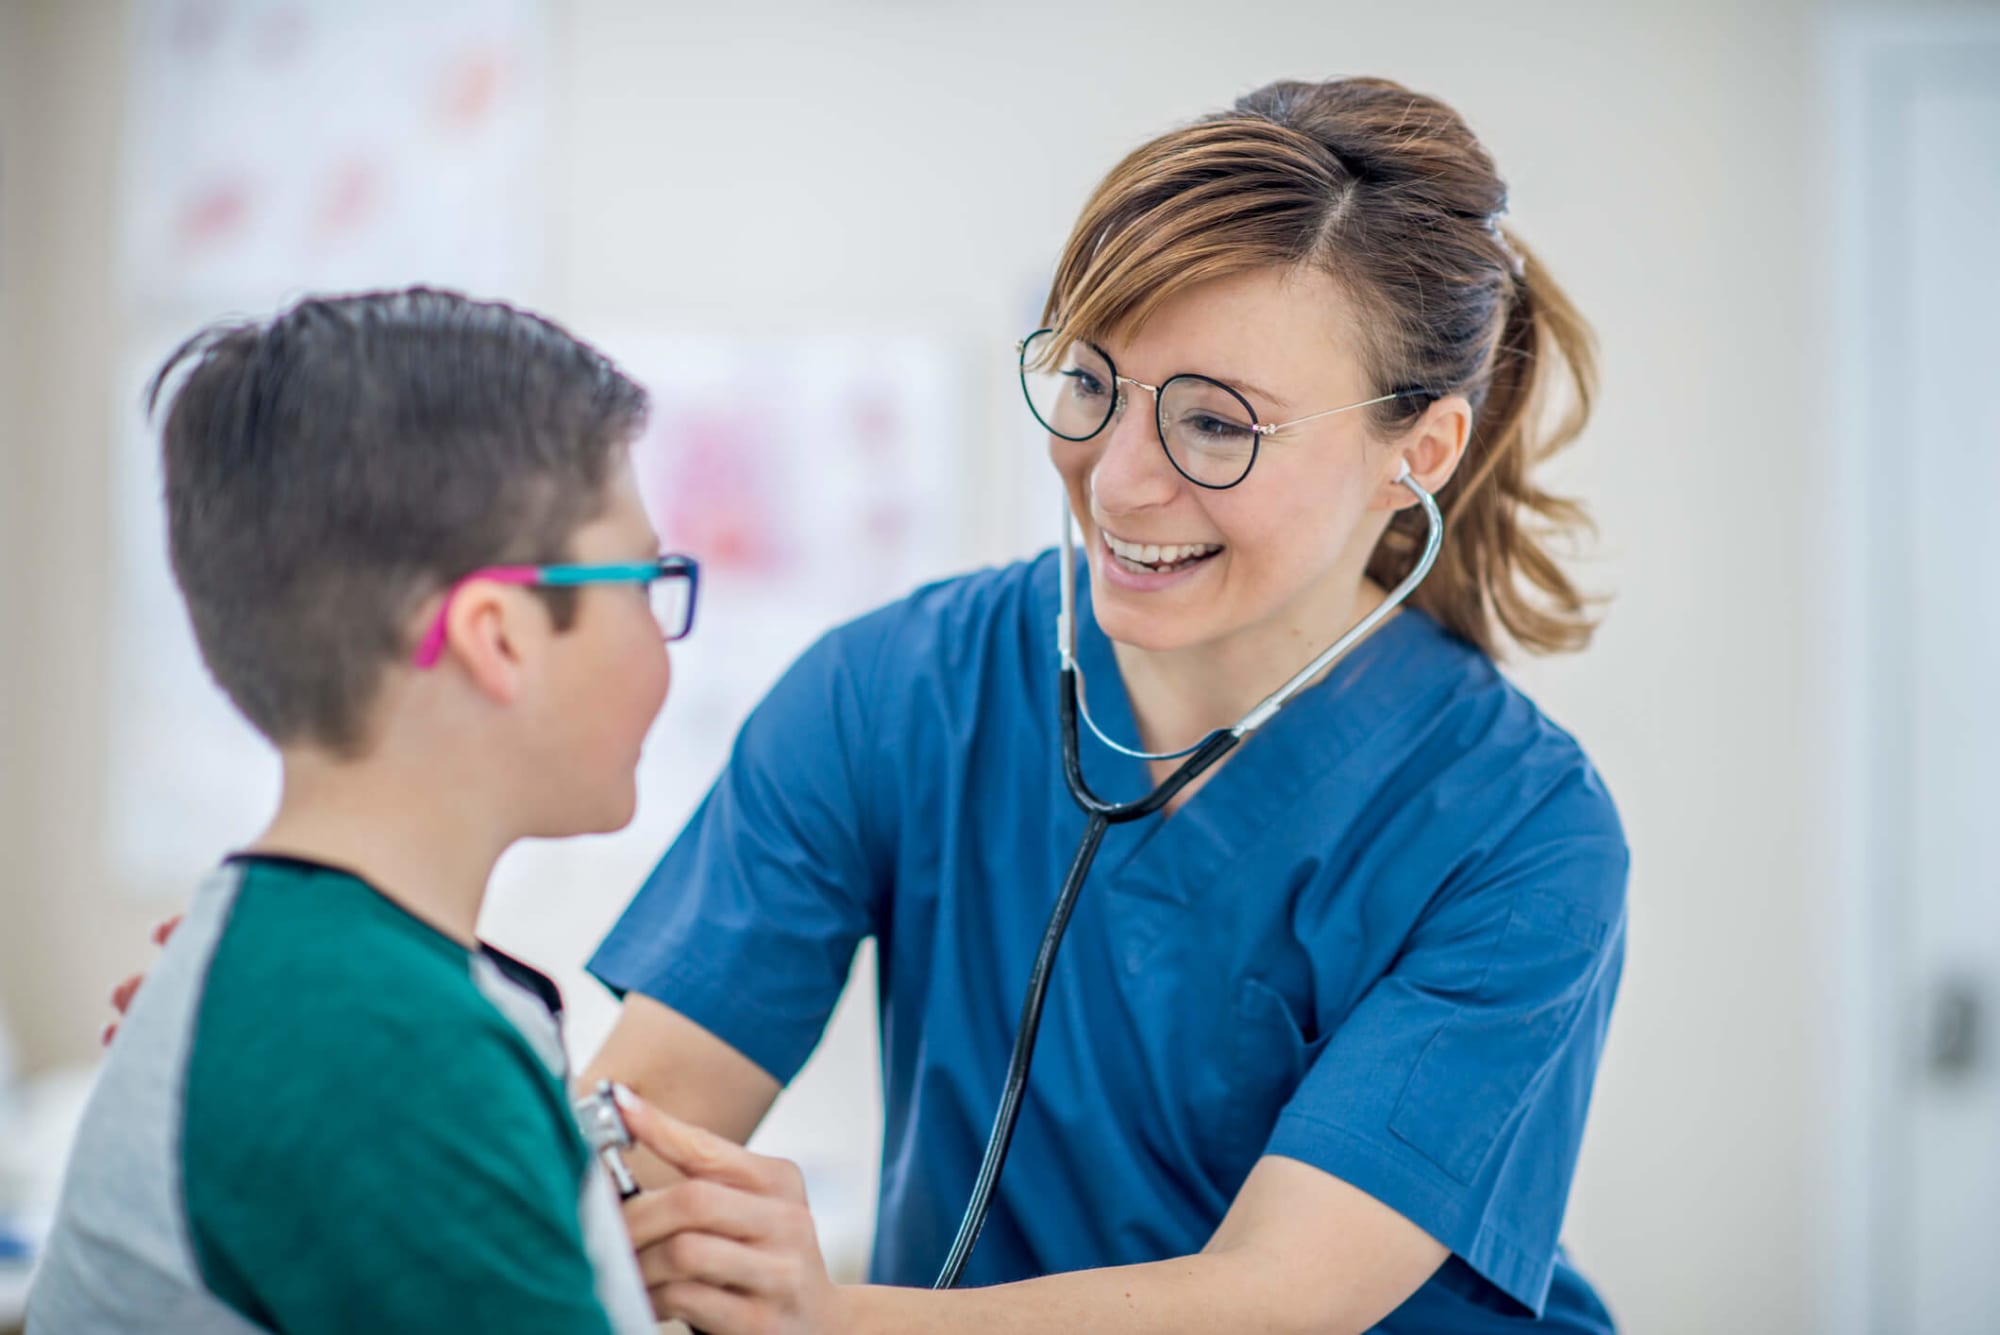 What to Know About Working as a Pediatric Nurse